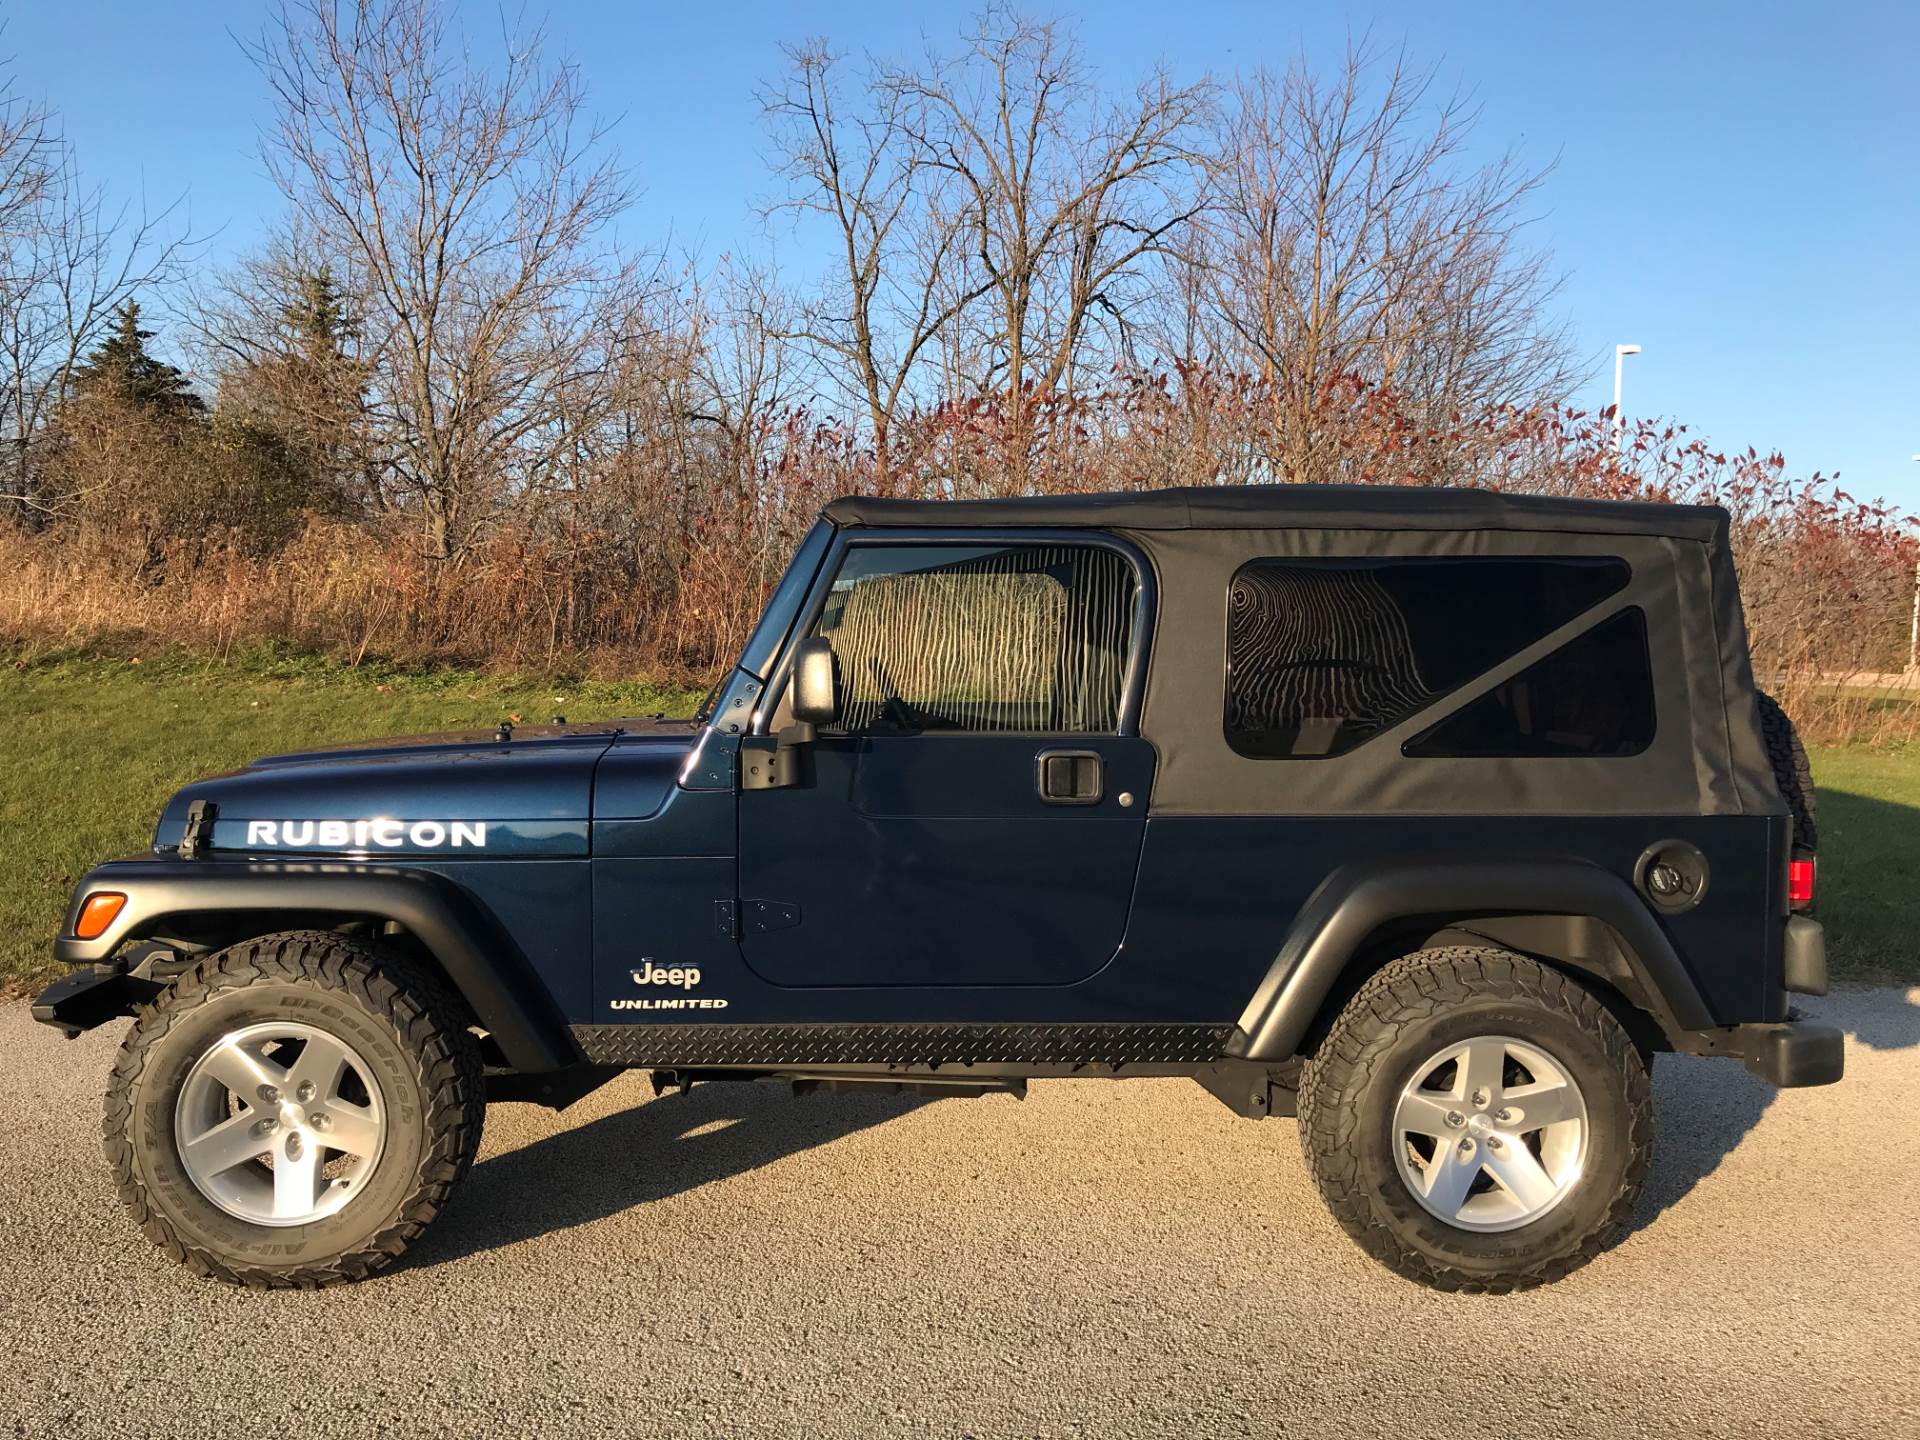 2006 Jeep Wrangler Unlimited Rubicon 2dr SUV 4WD in Big Bend, Wisconsin - Photo 102